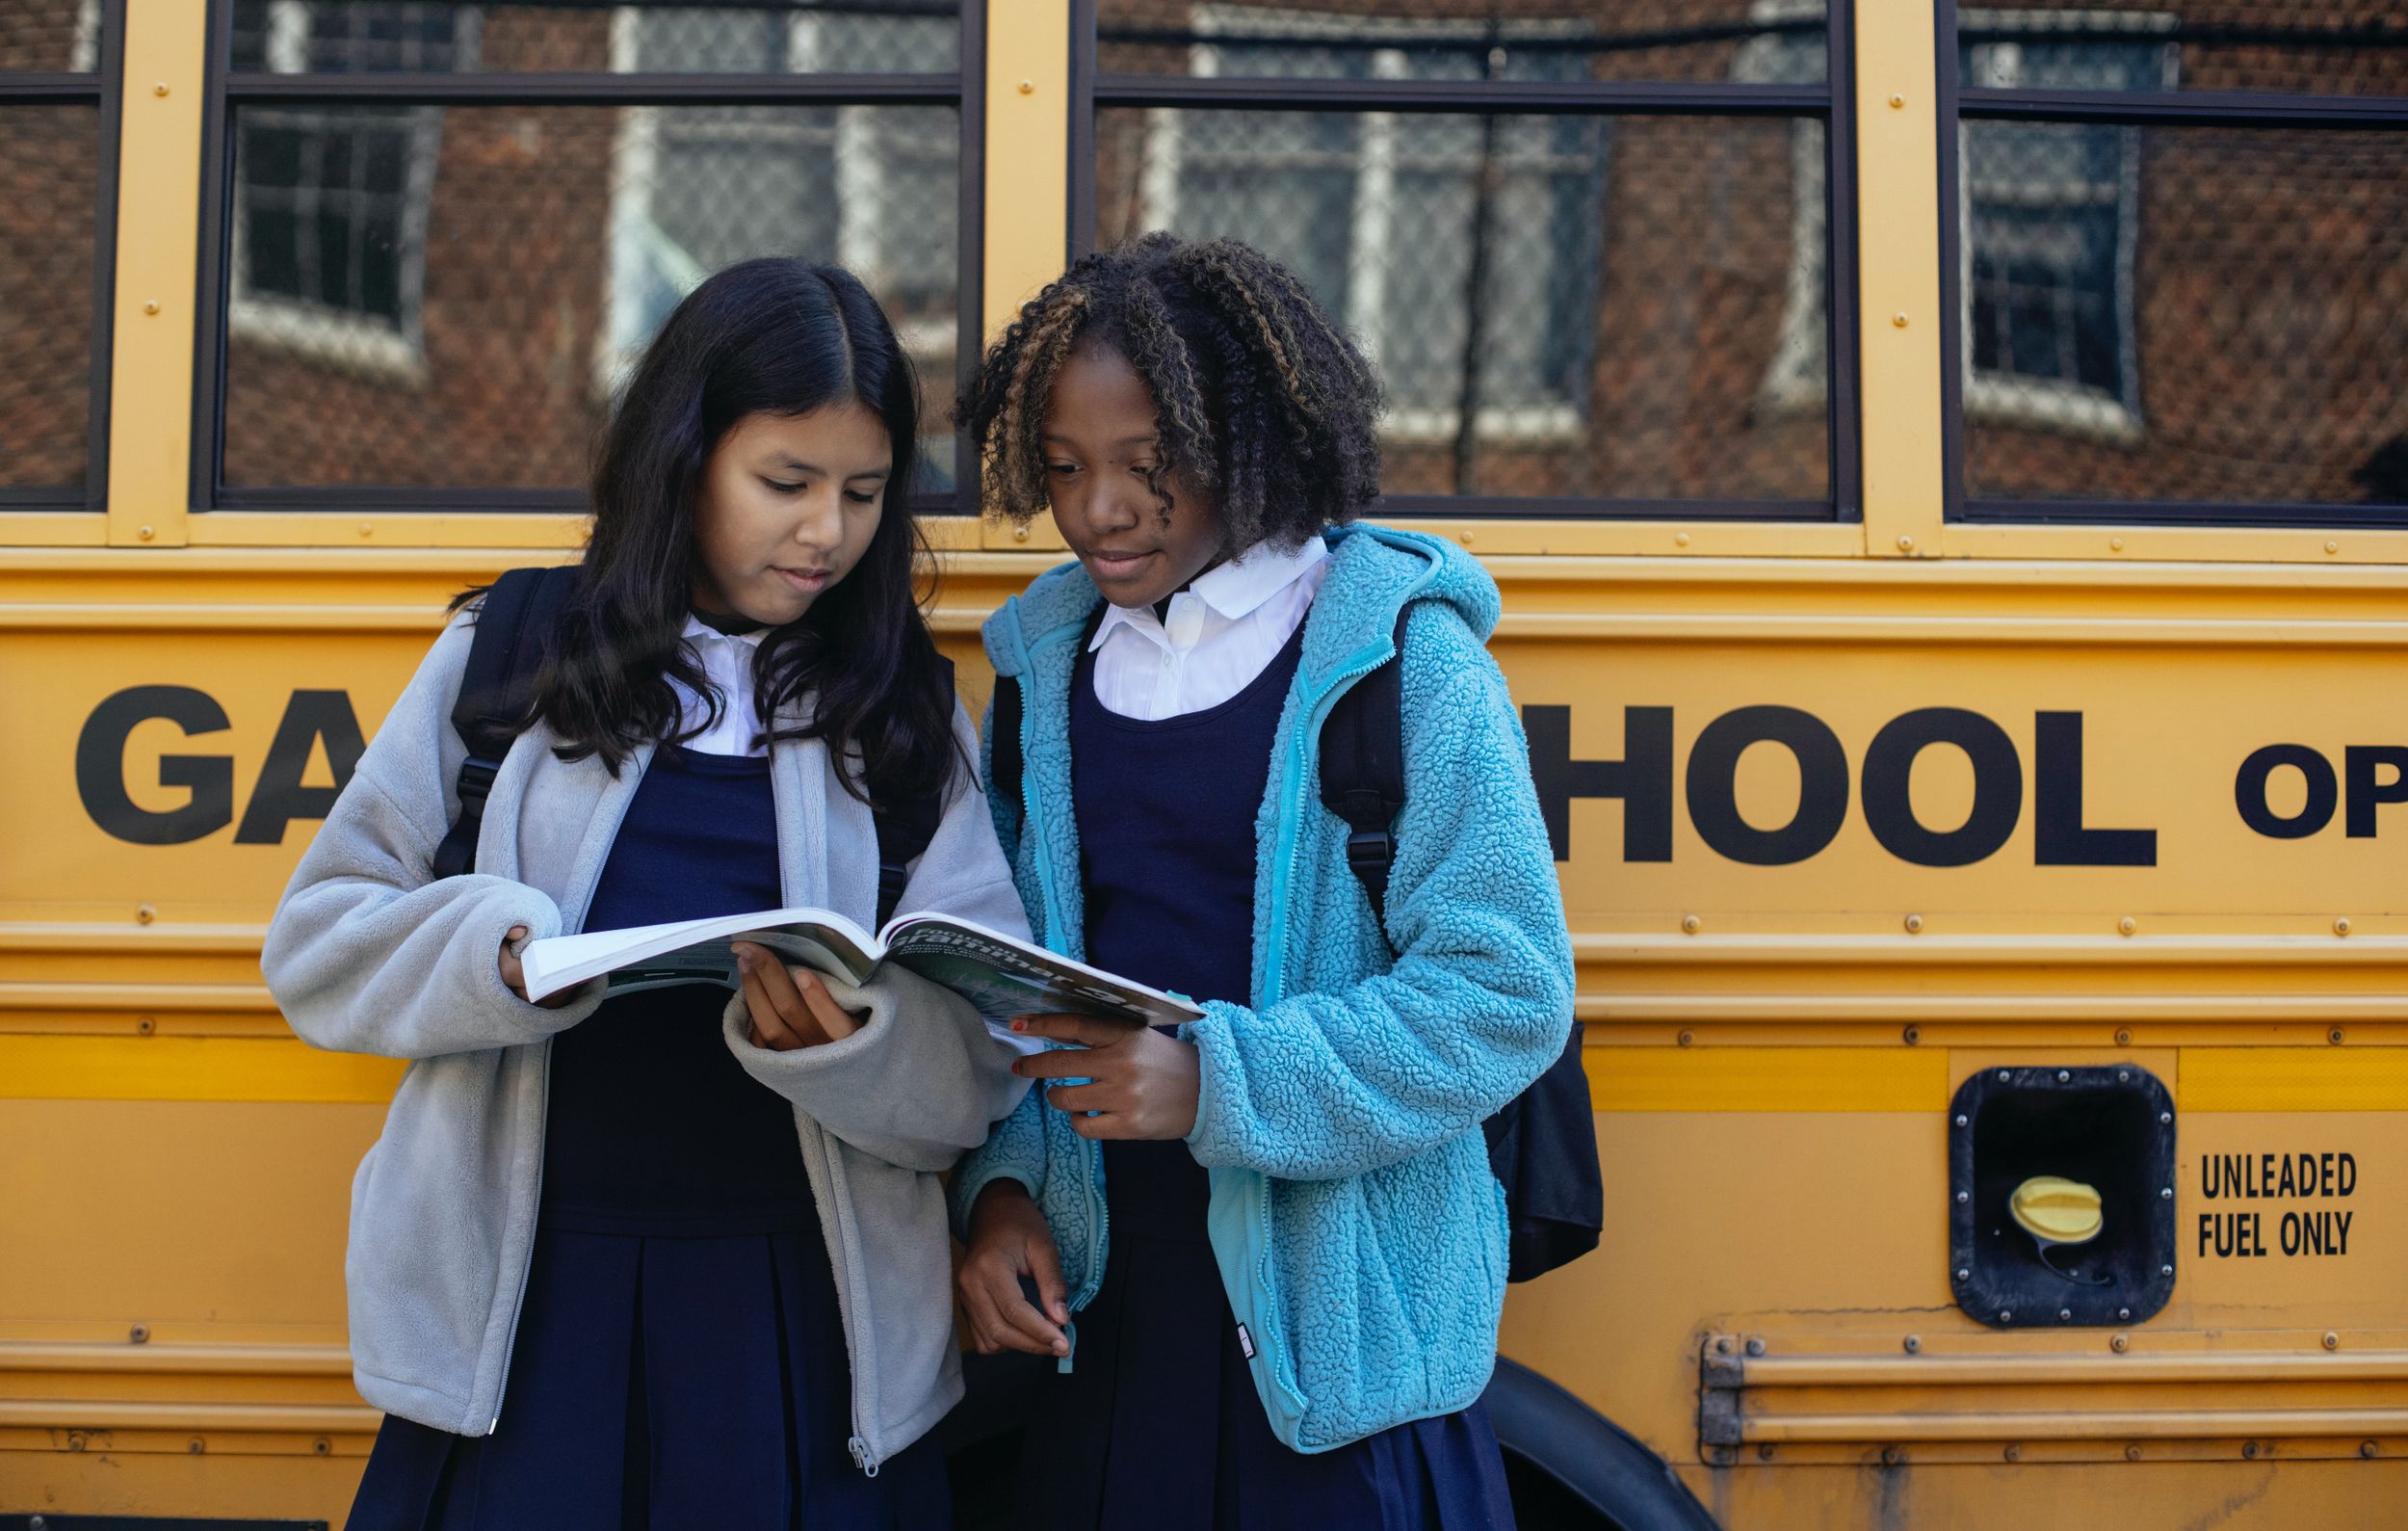 Two girls in uniforms stand outside of a yellow school bus.